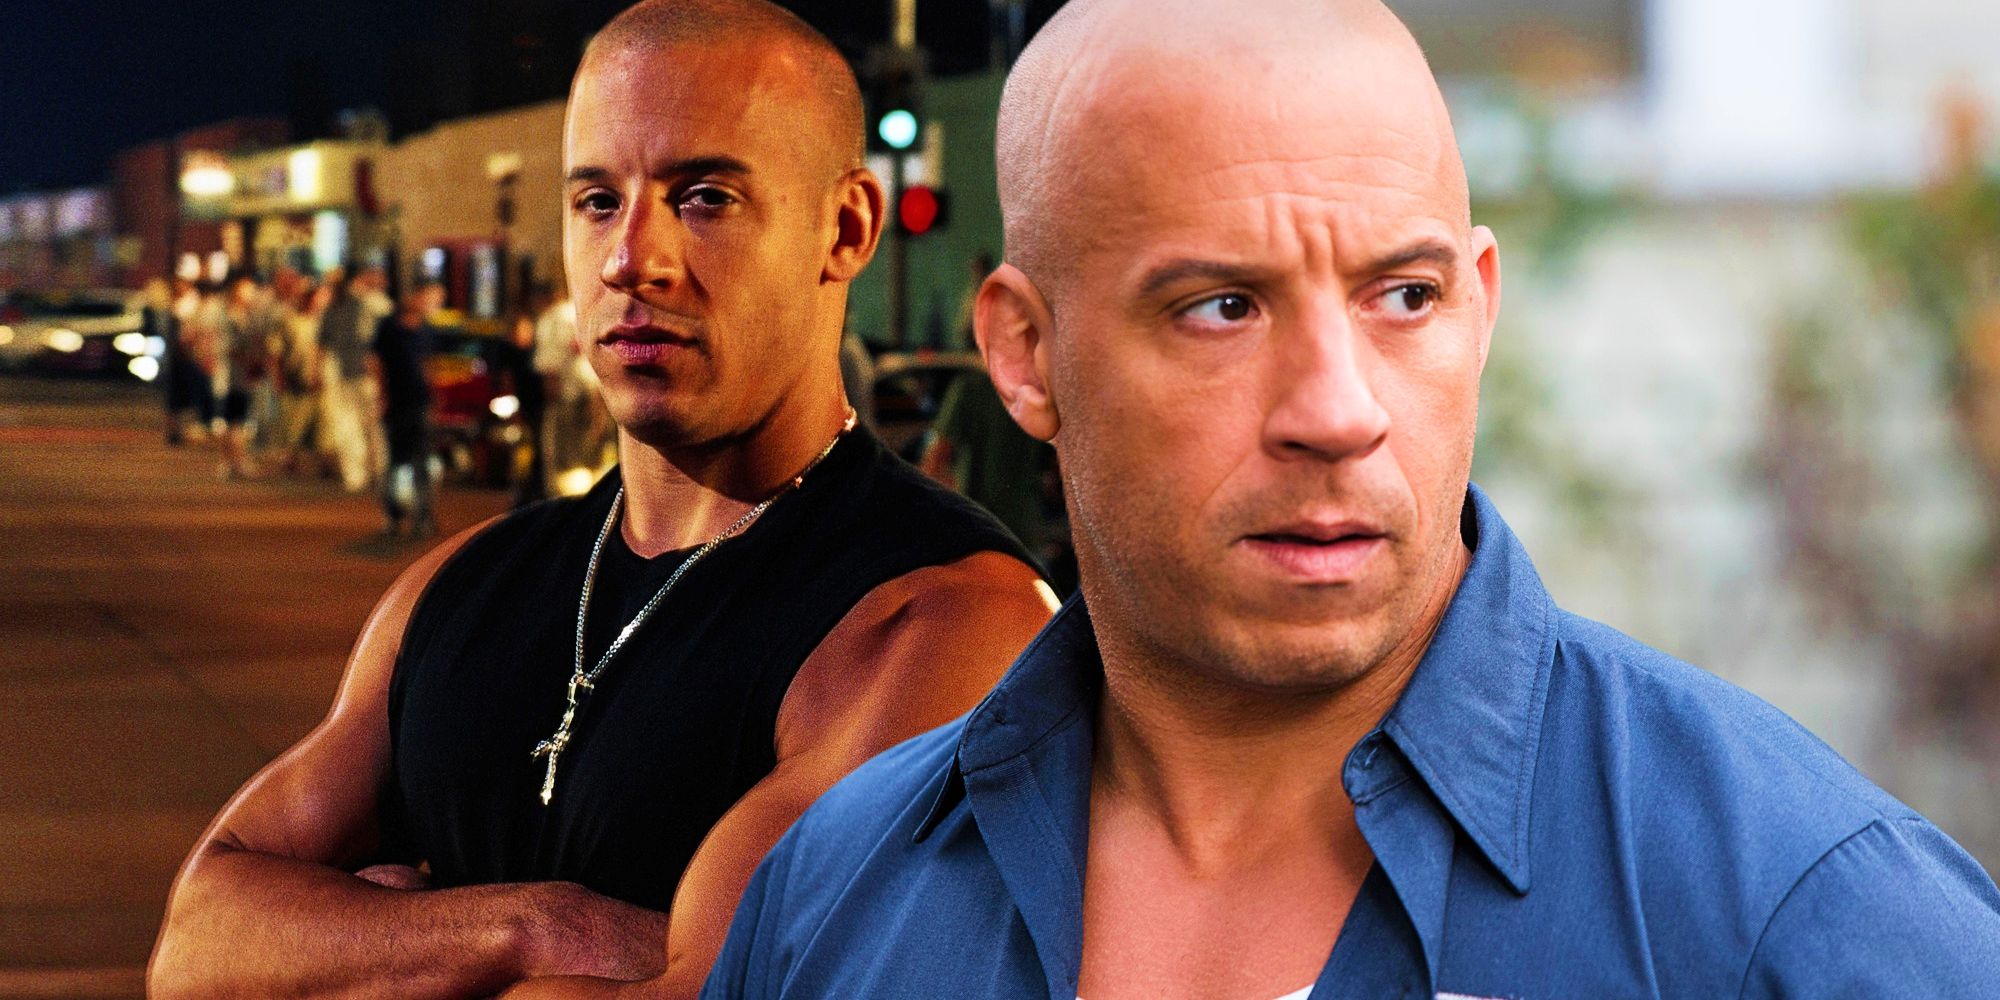 Vin Diesel as Dominic Toretto in F9 and in The Fast and the Furious